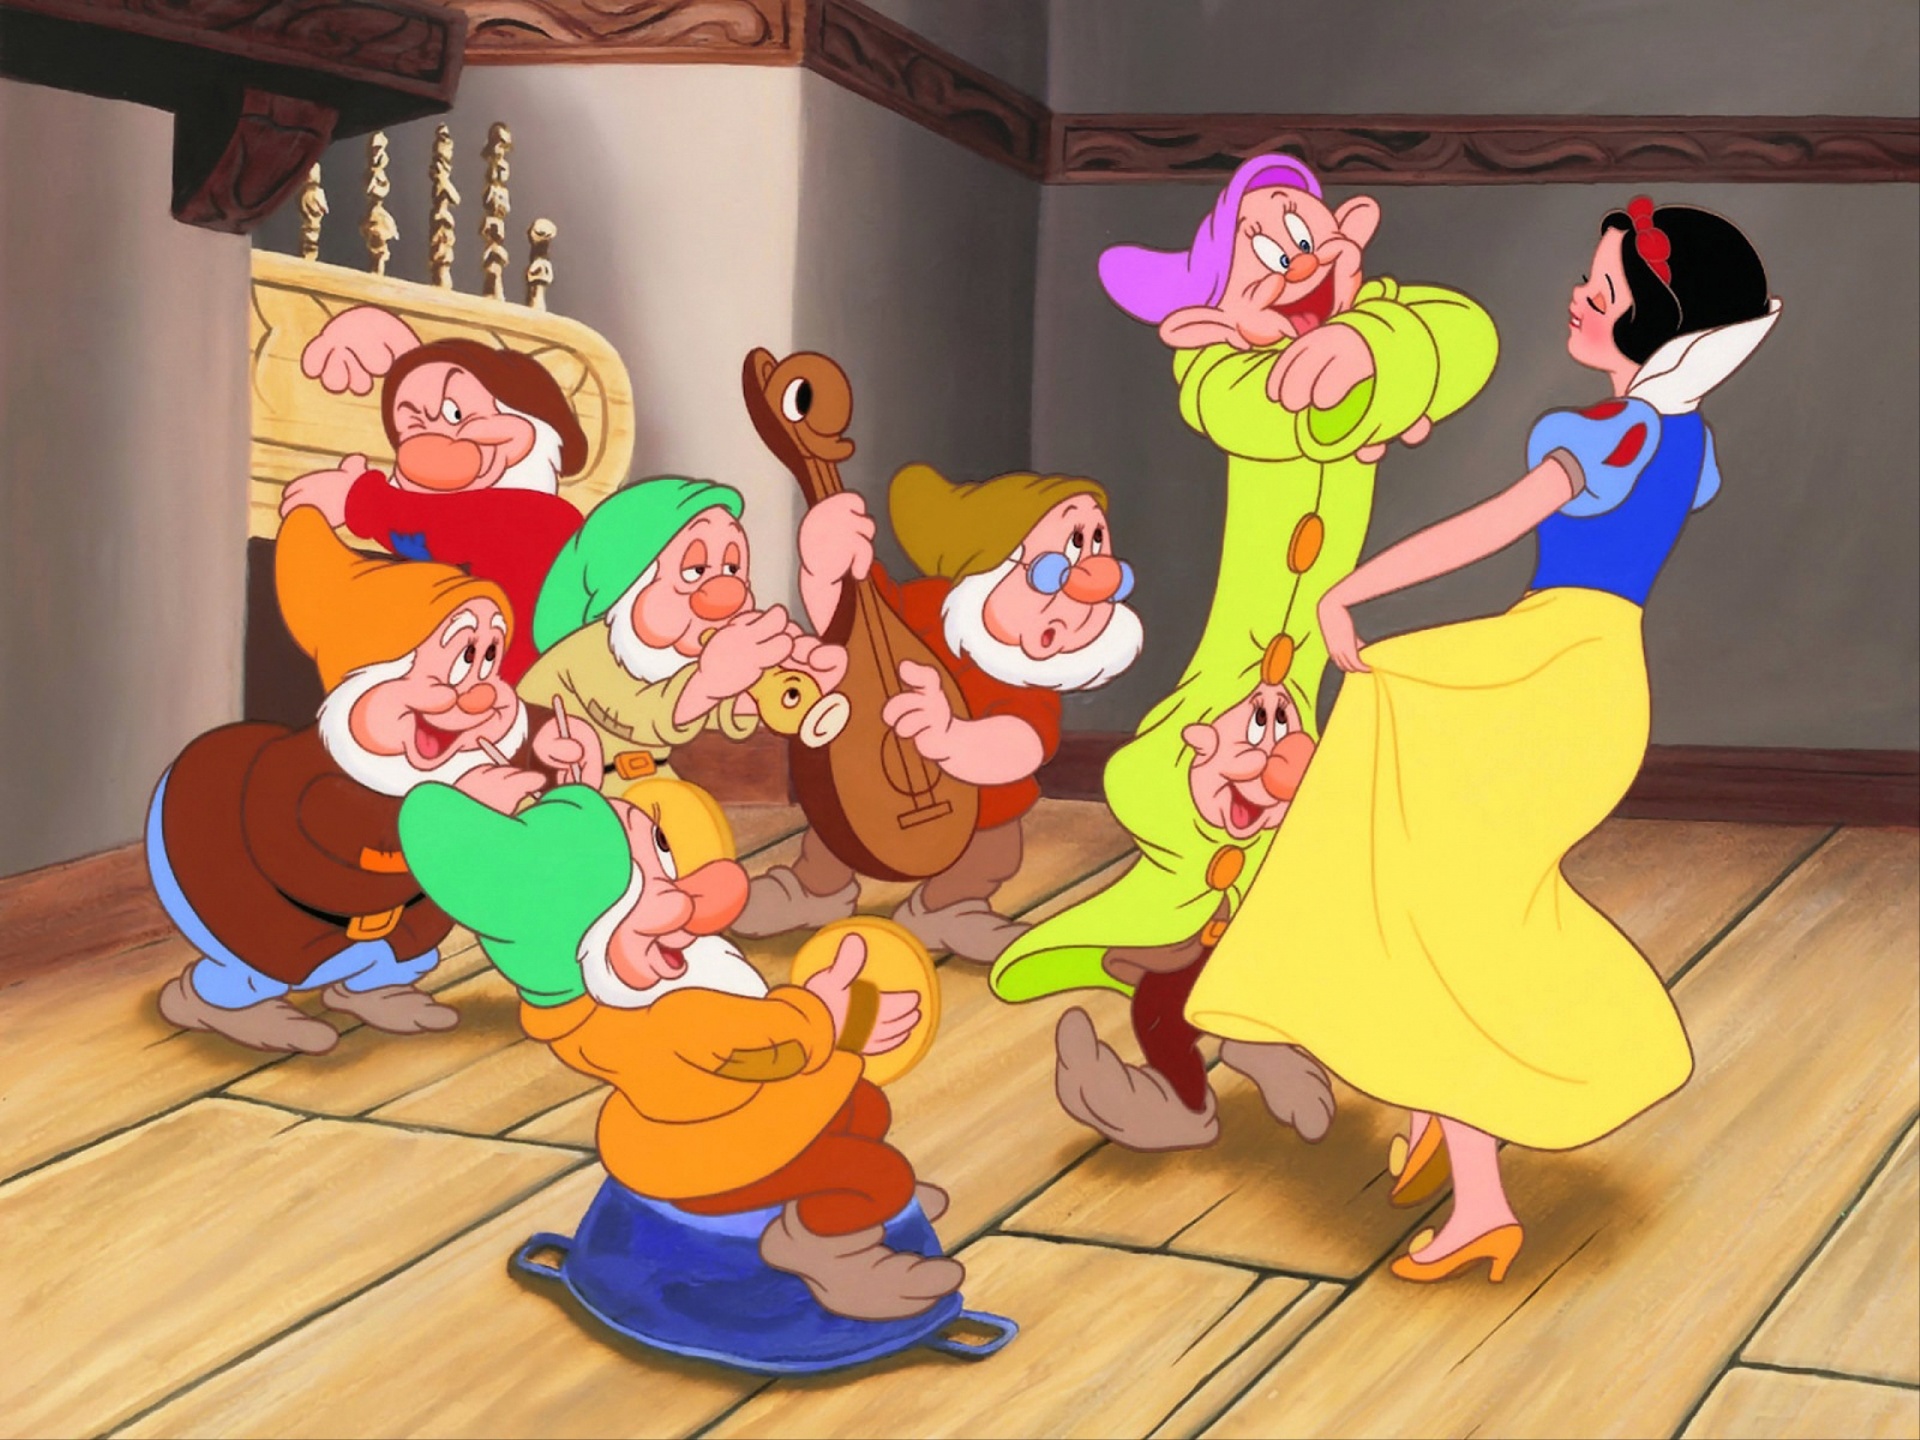 Movie Snow White and the Seven Dwarfs HD Wallpaper | Background Image